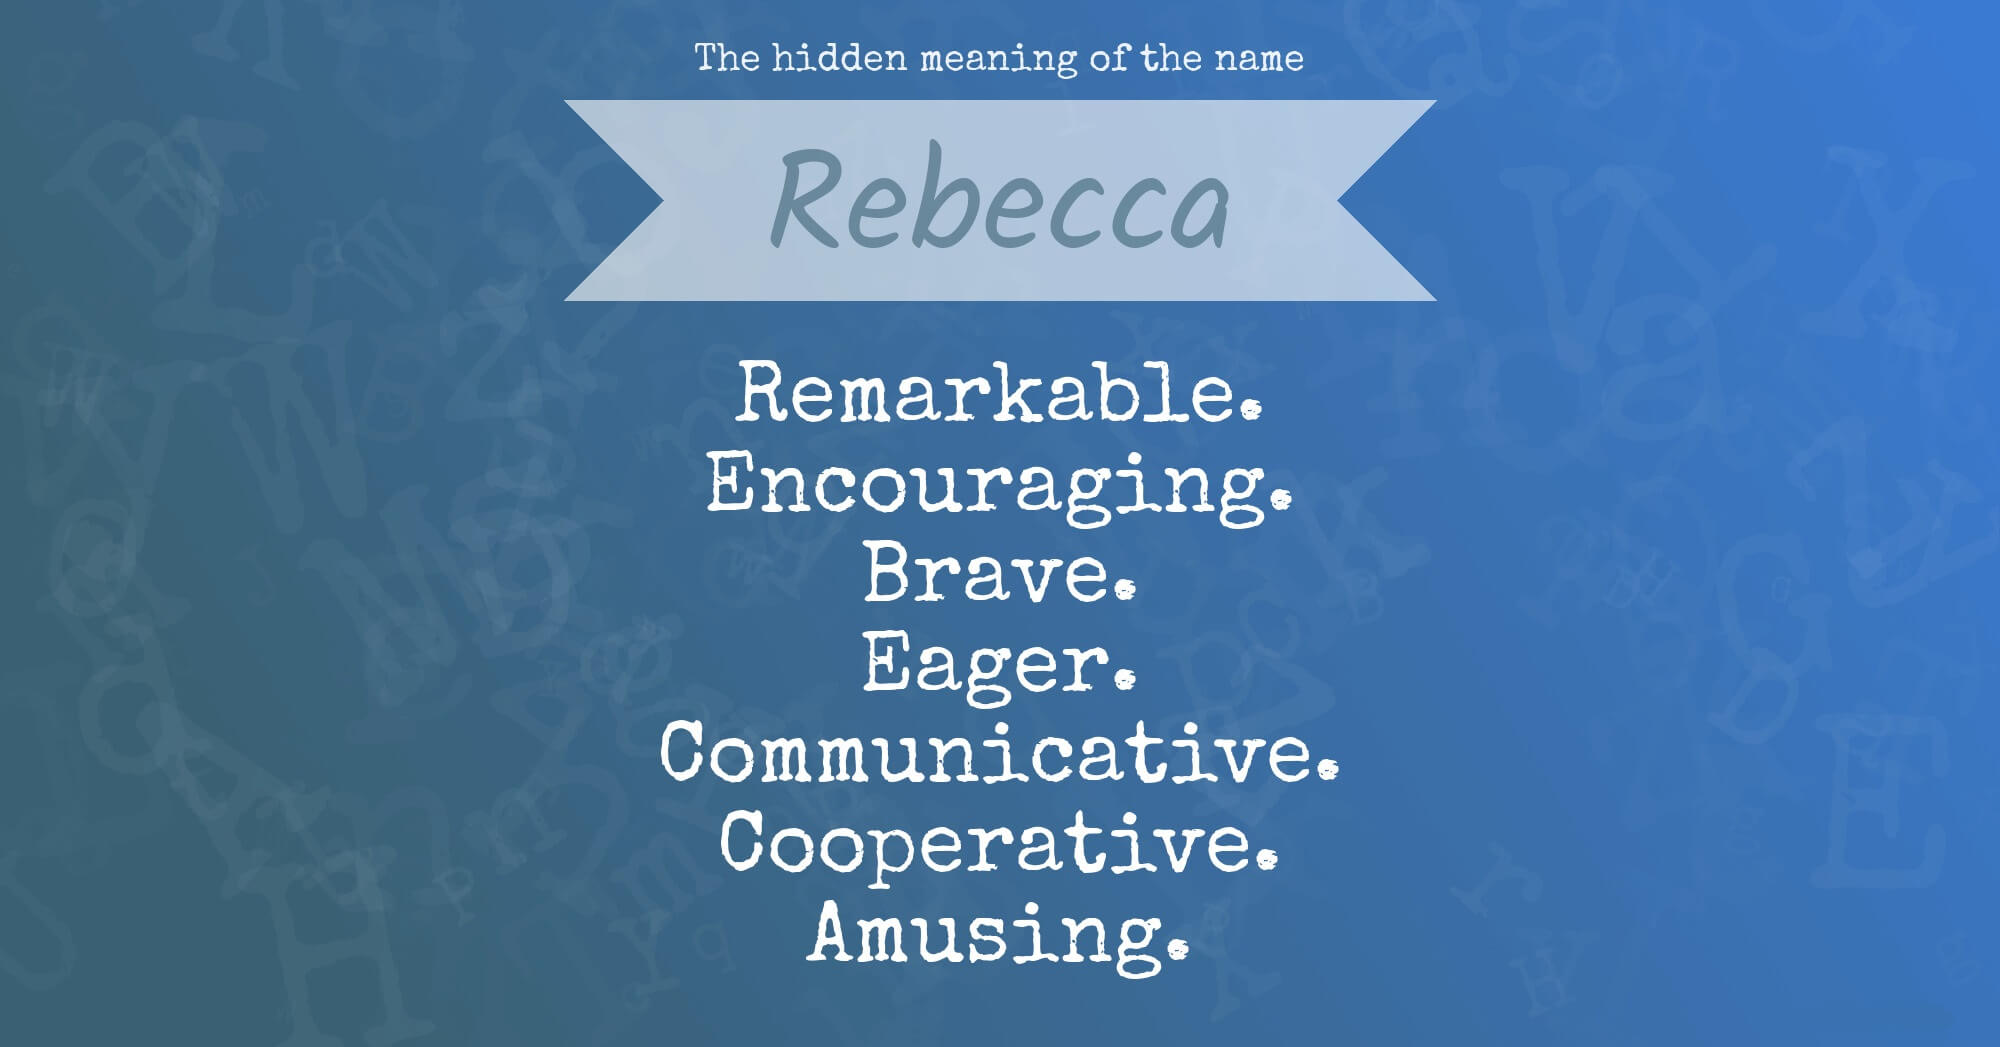 The Hidden Meaning Of The Name Rebecca